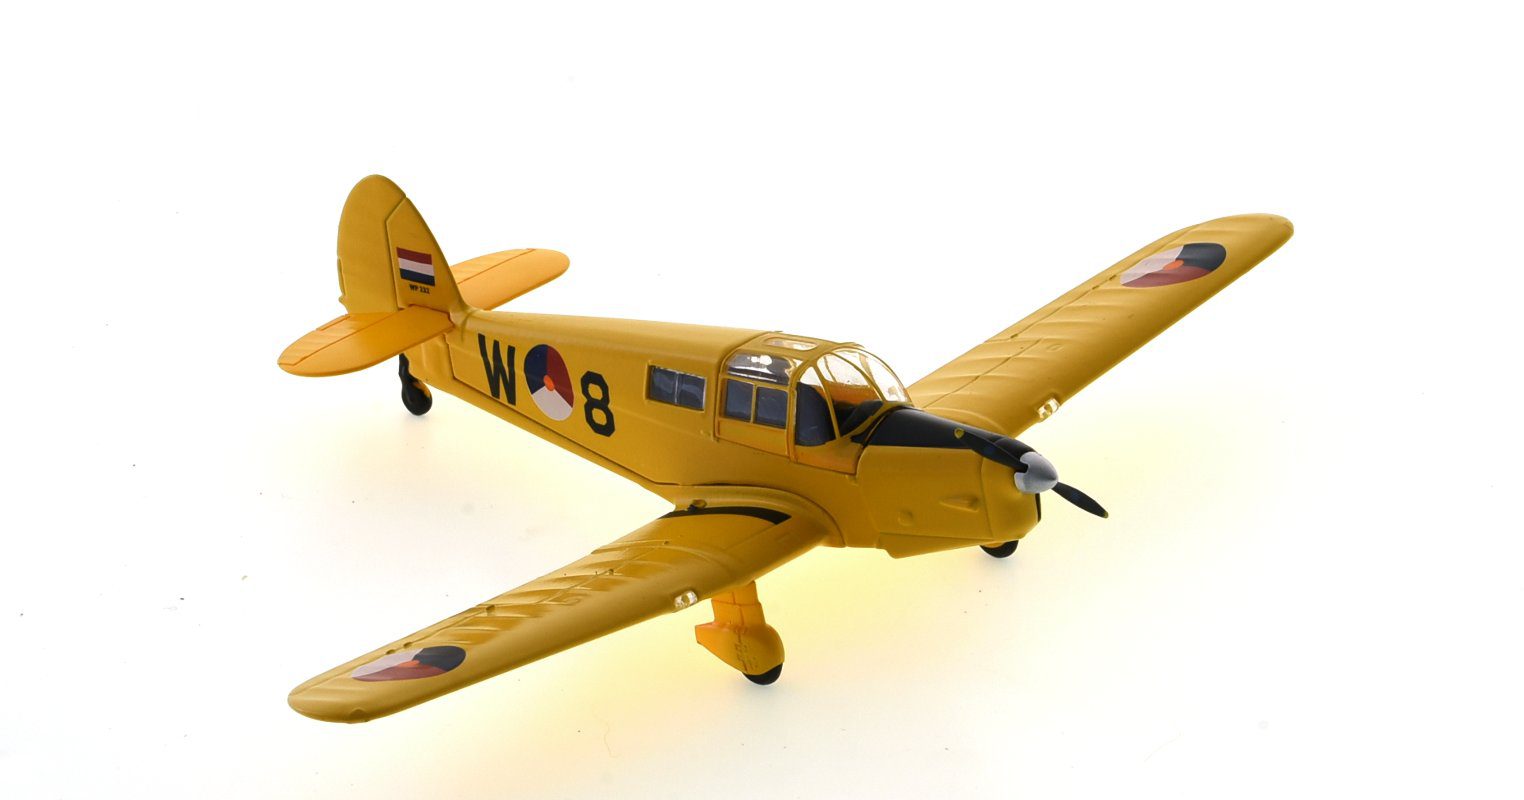 Front starboard side view of Oxford Diecast 72PP003 - 1/72 scale diecast model of the Percival P.34 Proctor Mk.IV, s/n W-8, in the overall trainer yellow paint scheme and markings of the KLu